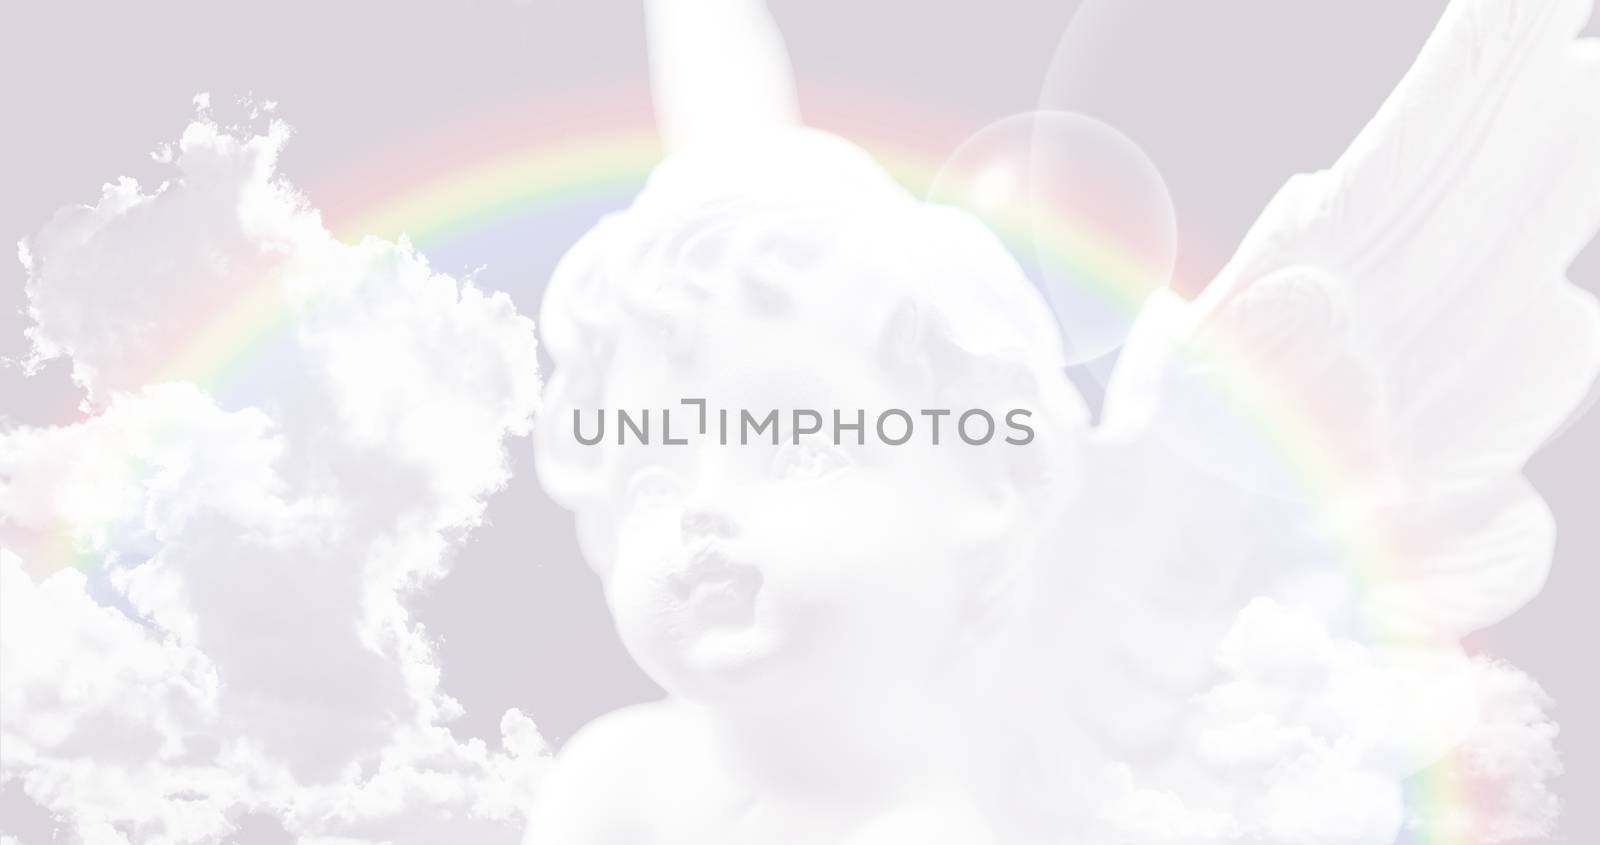 White Angel on the sky with rainbow-website header/banner